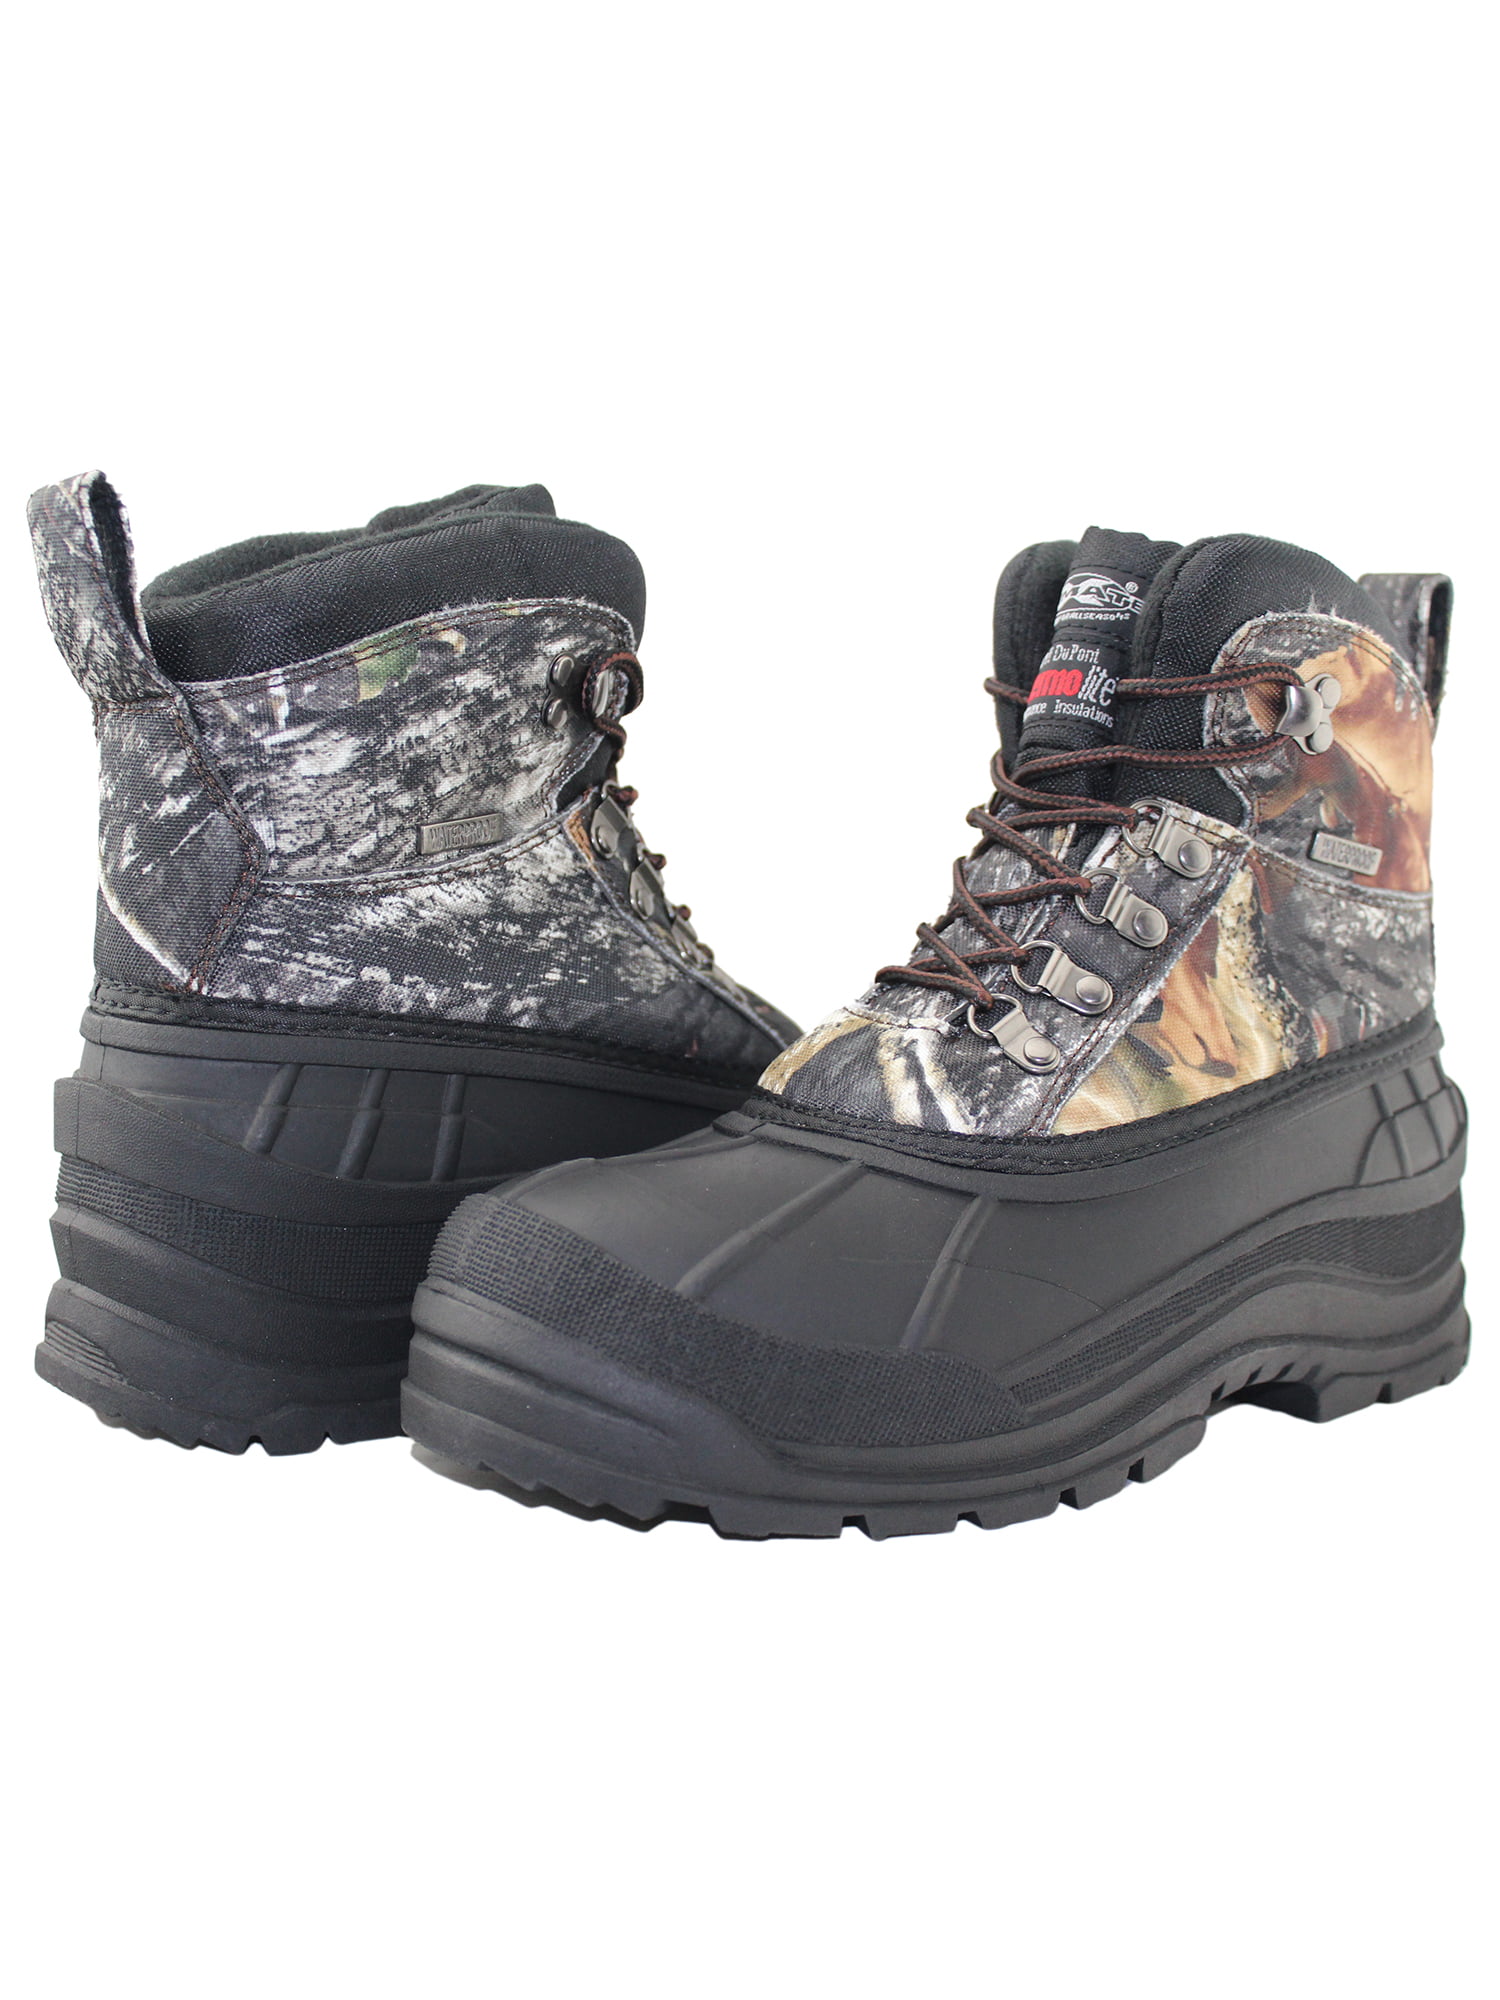 Mens Winter Snow Boots Camouflage Waterproof Insulated Hunting Thermolite Shoes 